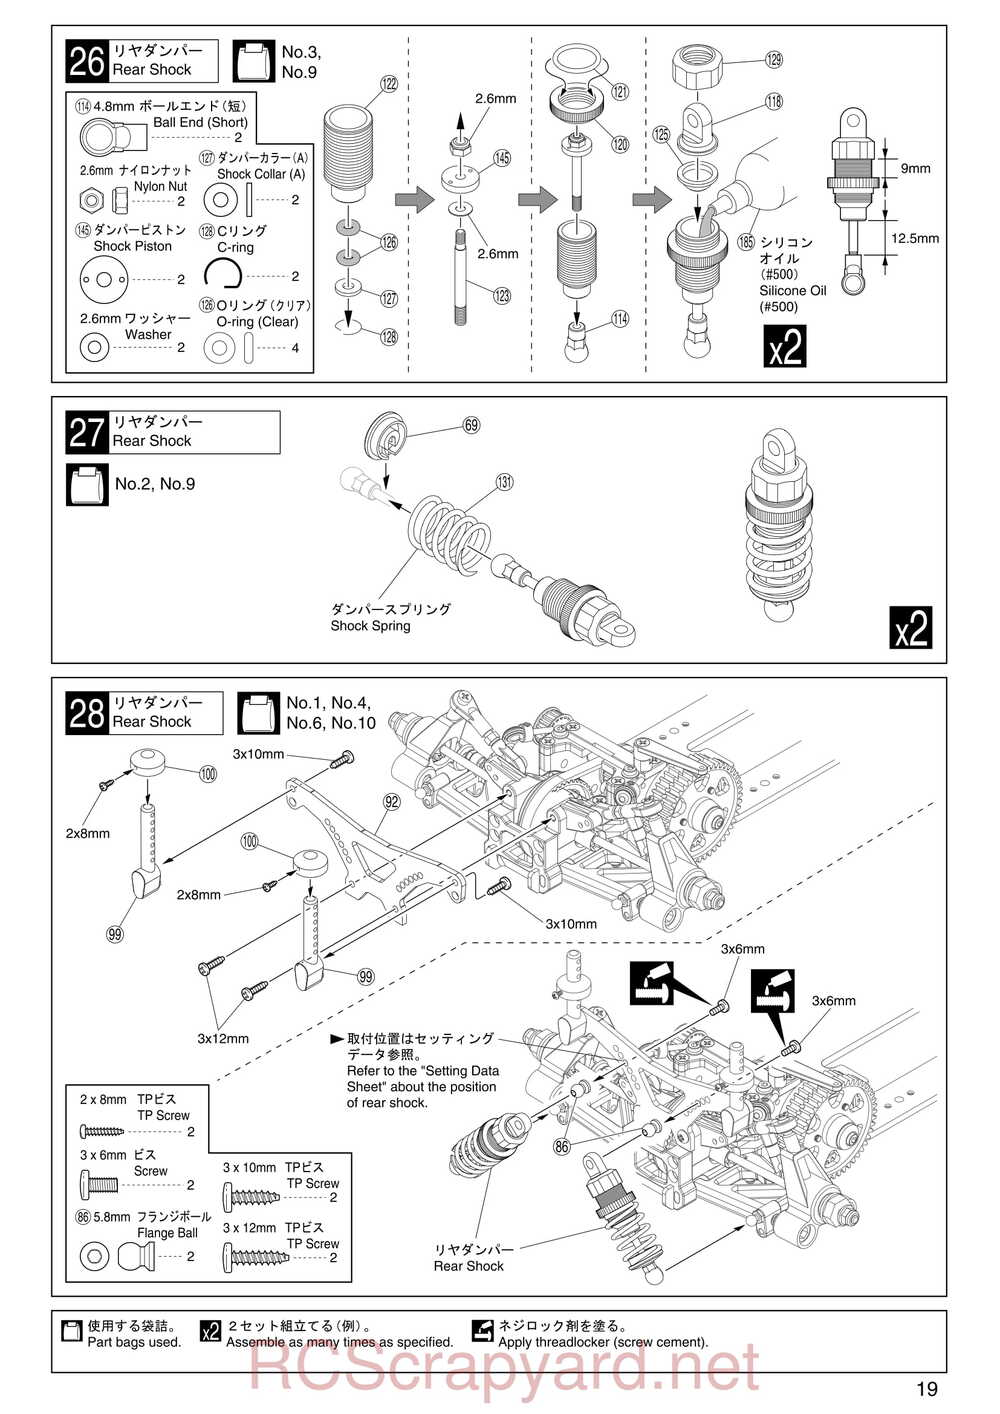 Kyosho - 31257 - V-One RRR Rubber - Manual - Page 19